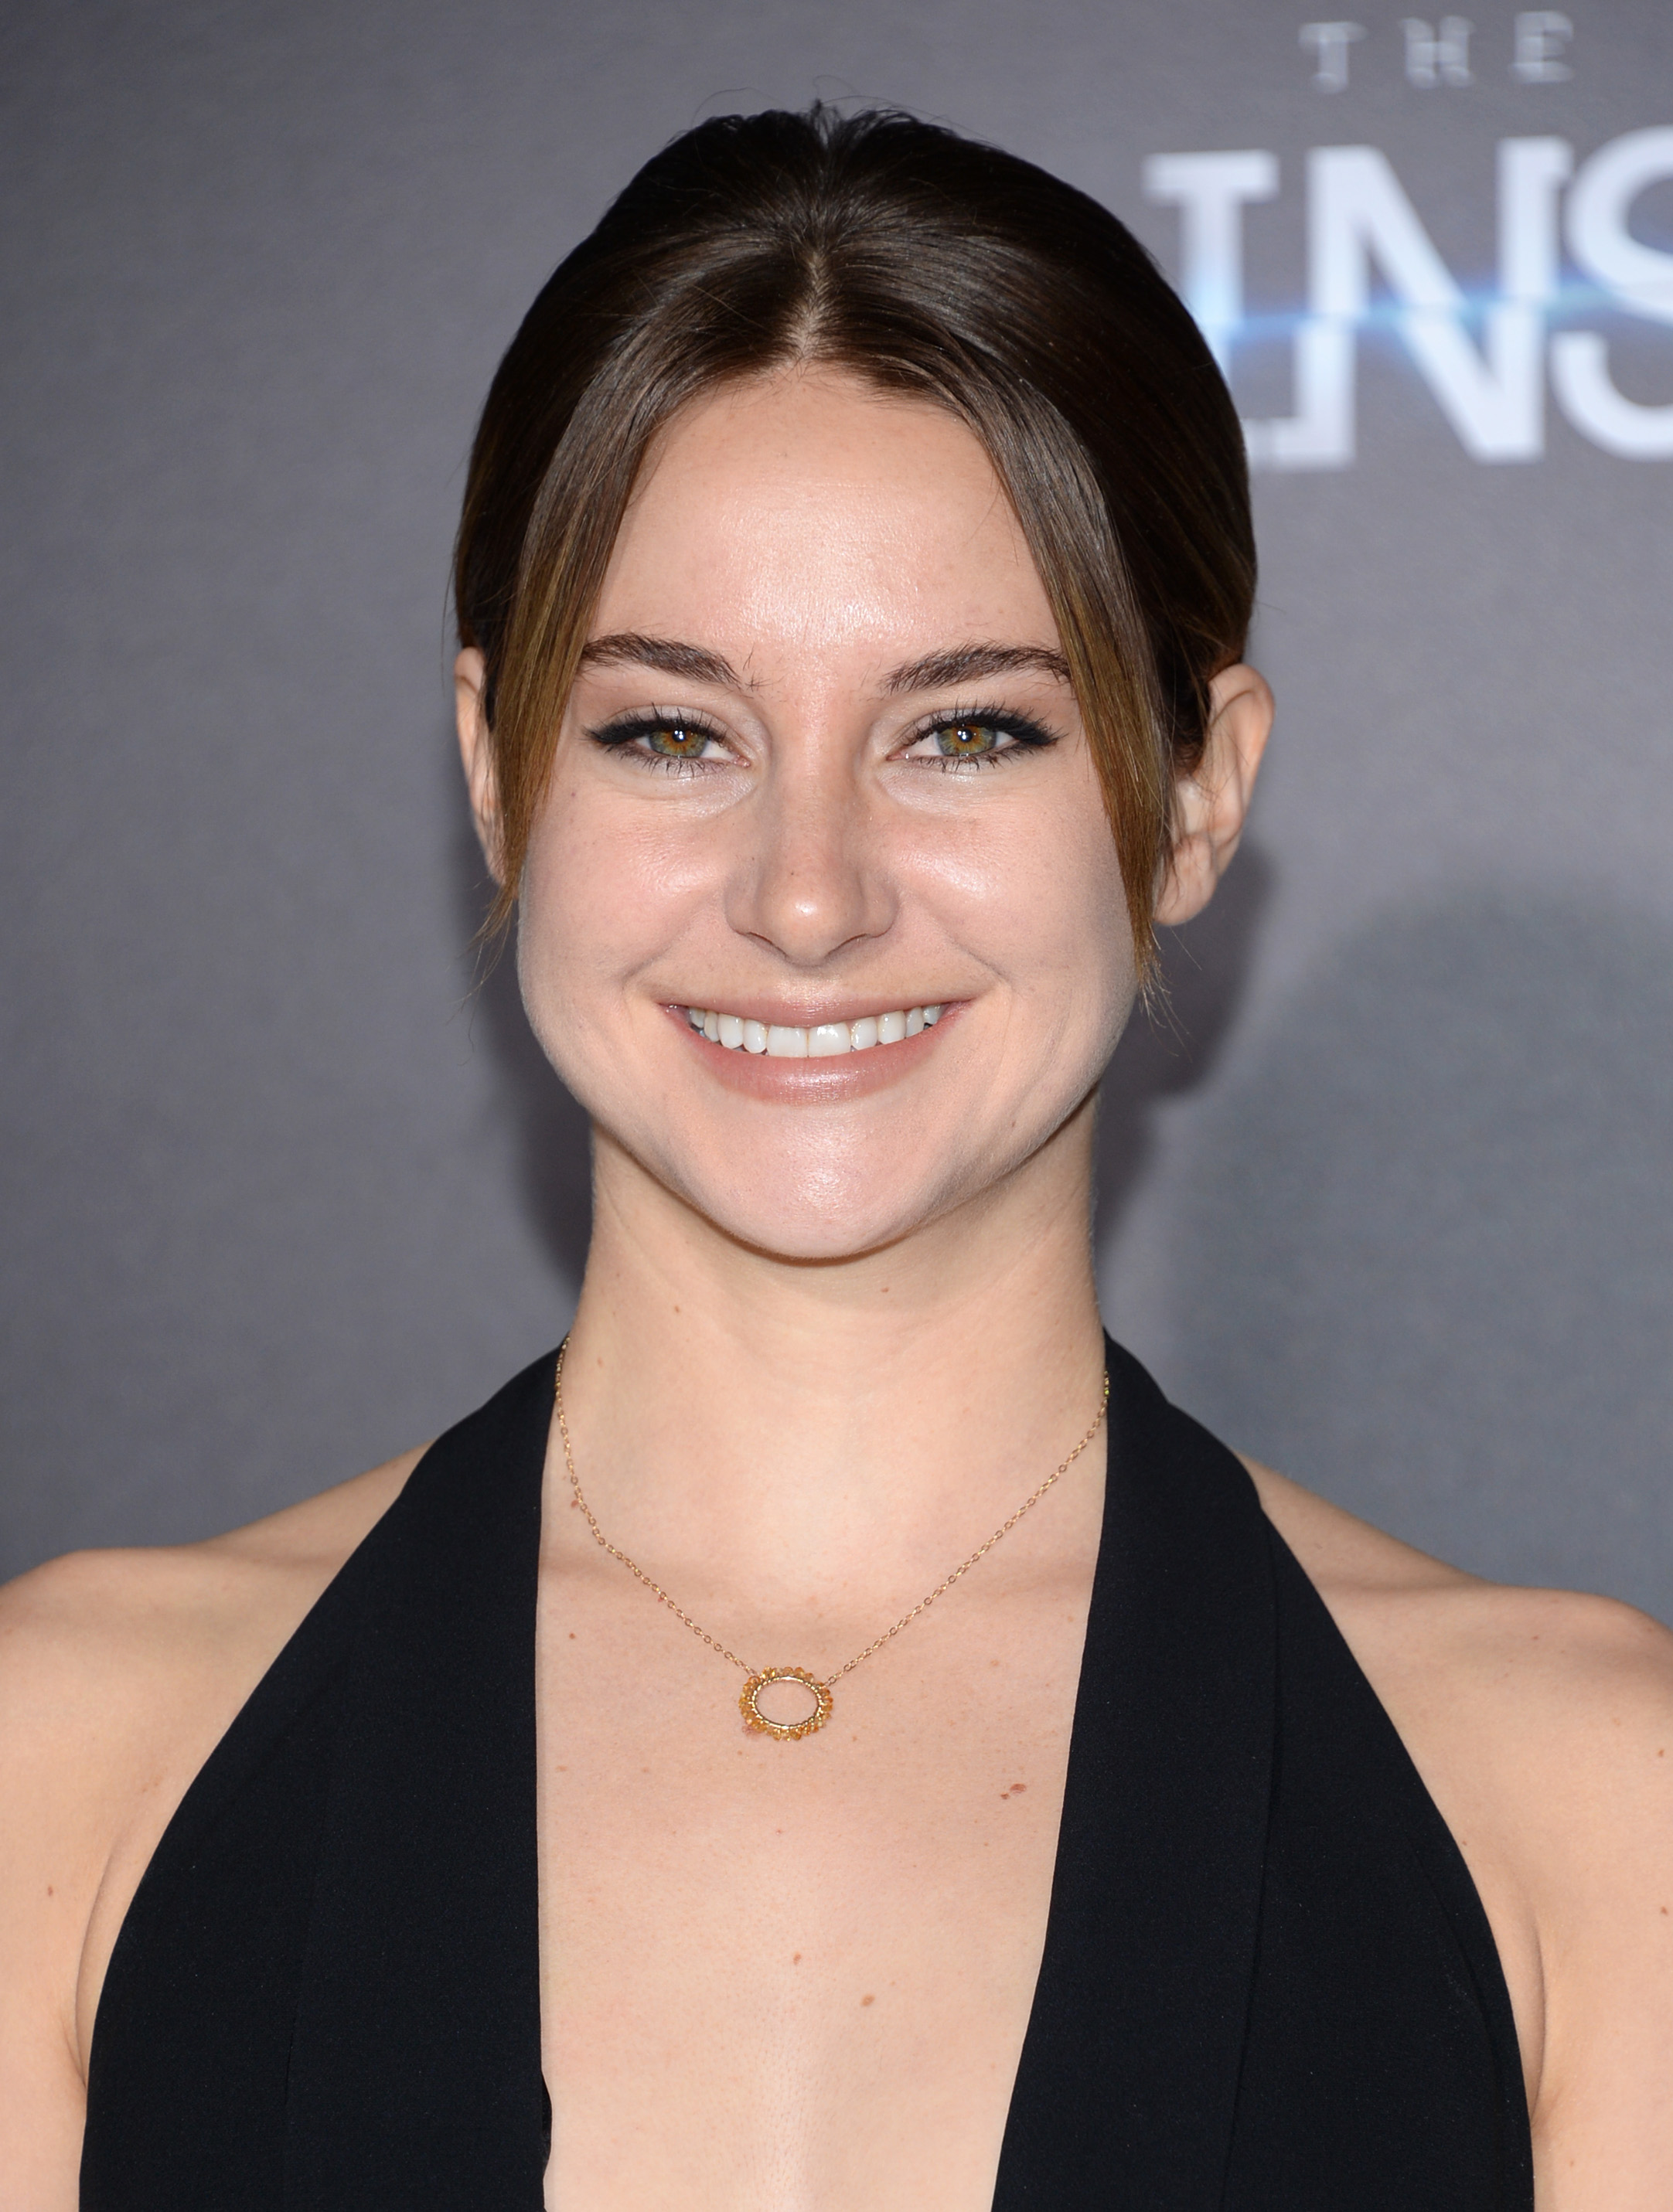 Shailene Woodley arrives at the premiere of "The Divergent Series: Insurgent" in New York City on March 16, 2015.